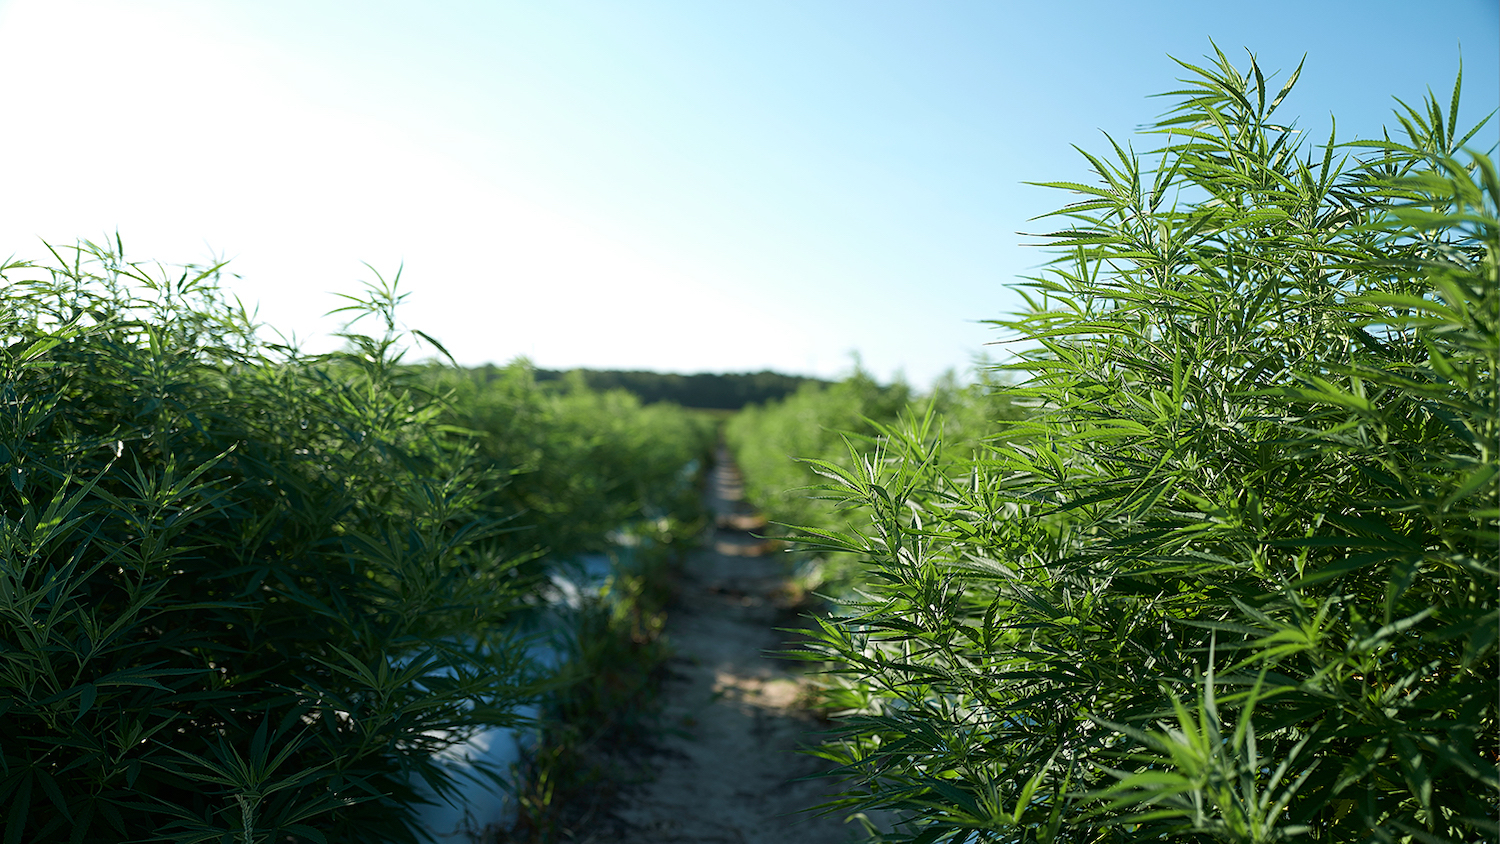 A picture of industrial hemp growing in a field